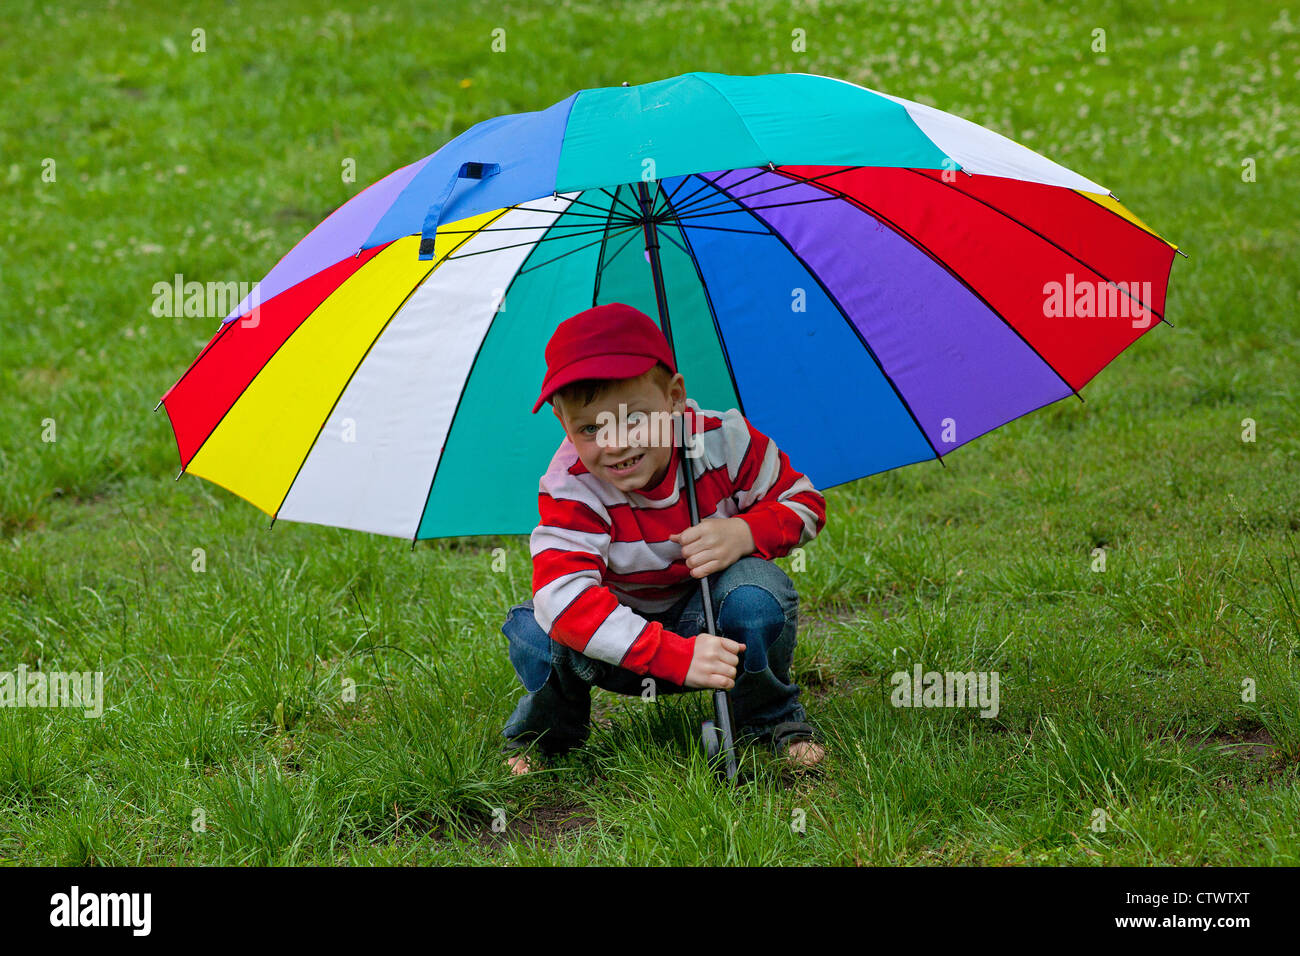 young boy with a big colourful umbrella Stock Photo